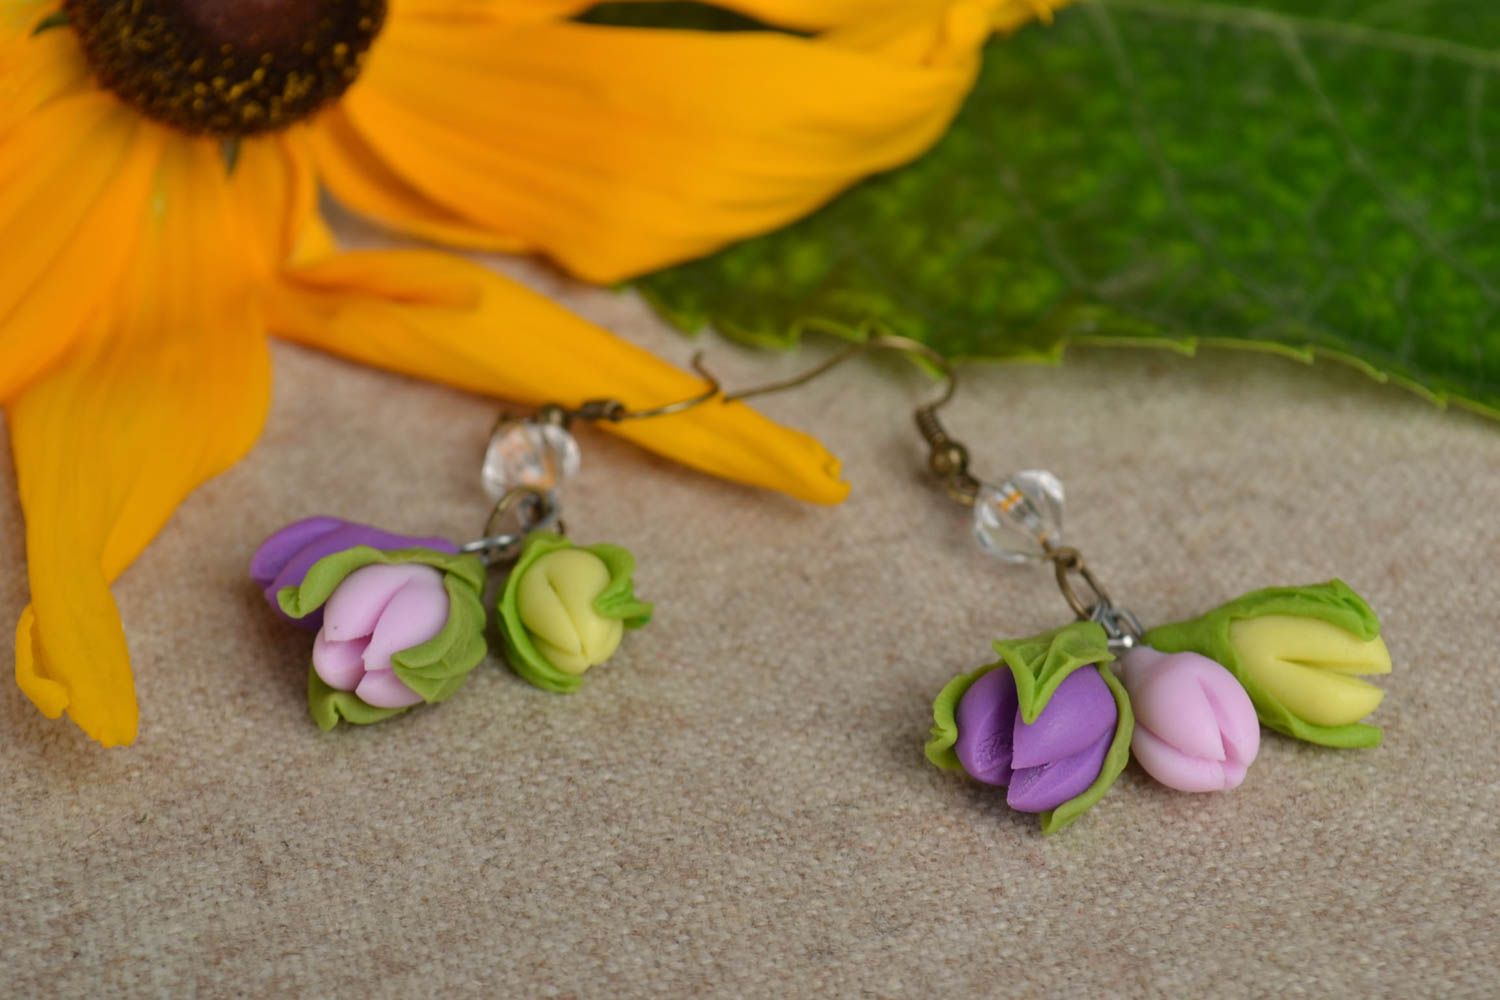 Dangling earrings flower jewelry handmade earrings polymer clay gifts for her photo 1